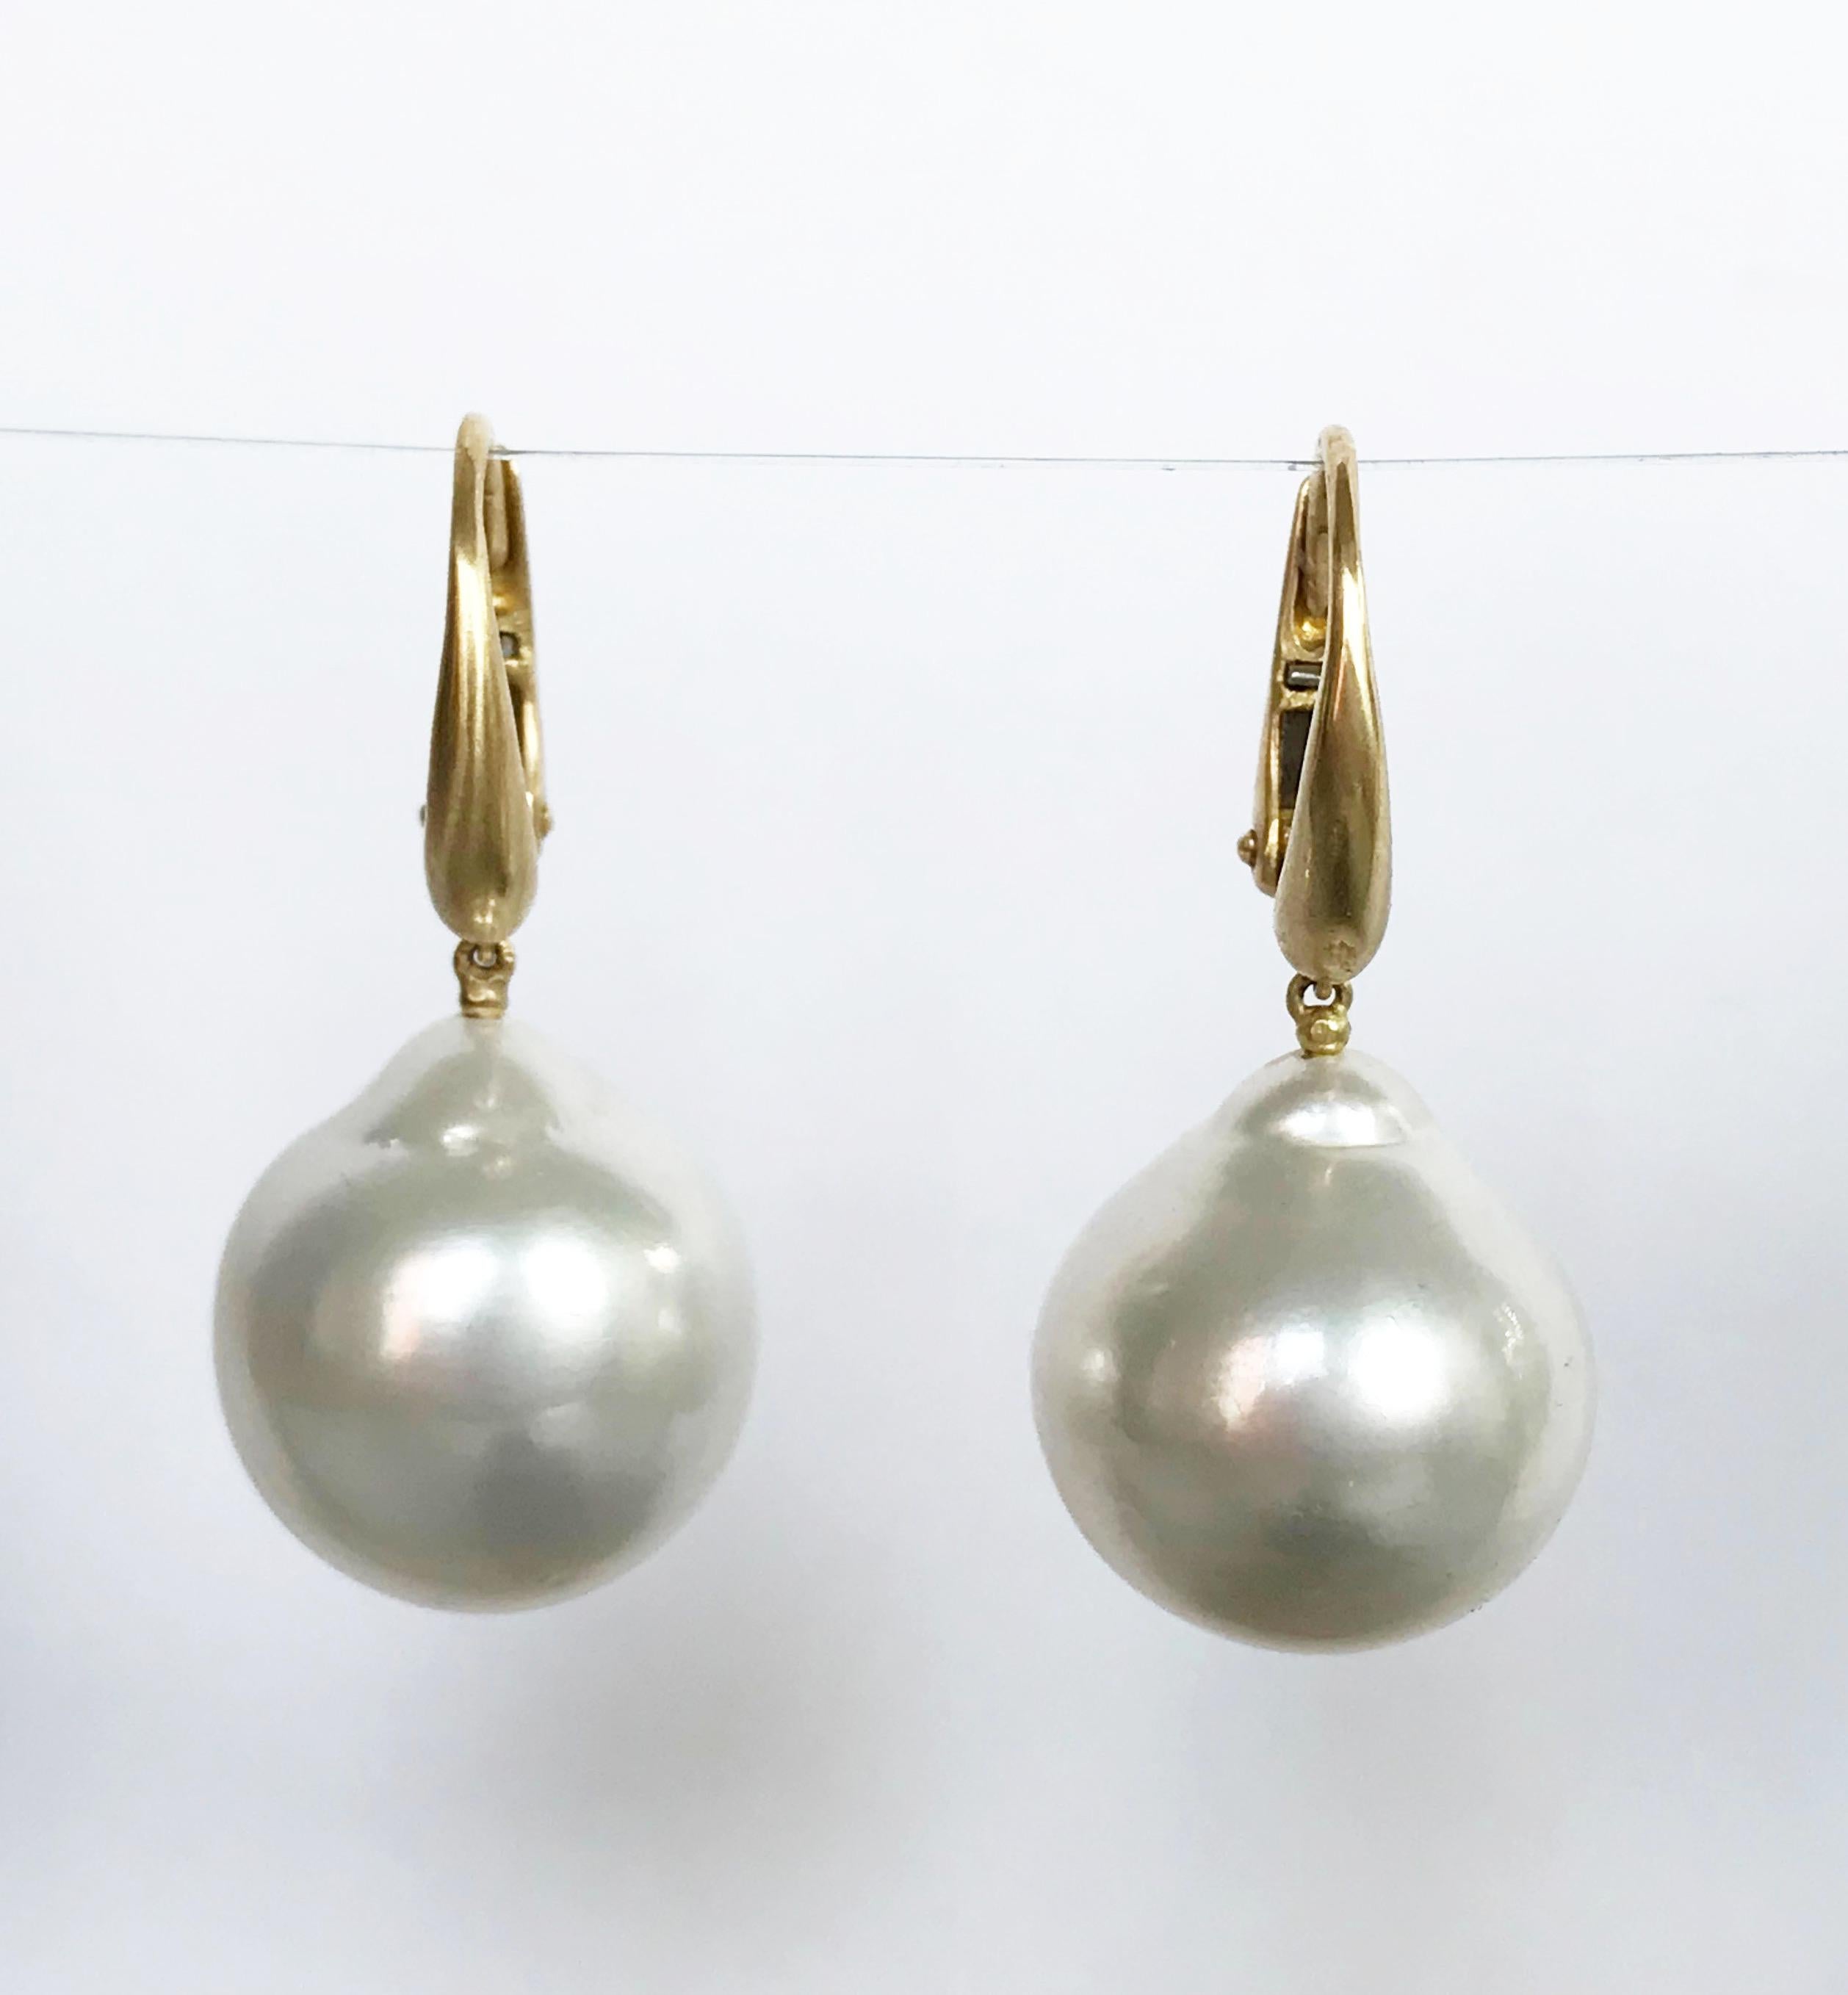 Dalben design 18 kt semi-lucid finished yellow gold earrings with two baroque drop-shape South Sea pearls of 15,4 x 16,6 mm circa weight 51,5 carat . 
Earring dimension :  
width 15,4 mm 
height with leverback 33,8 mm  
The earrings has been